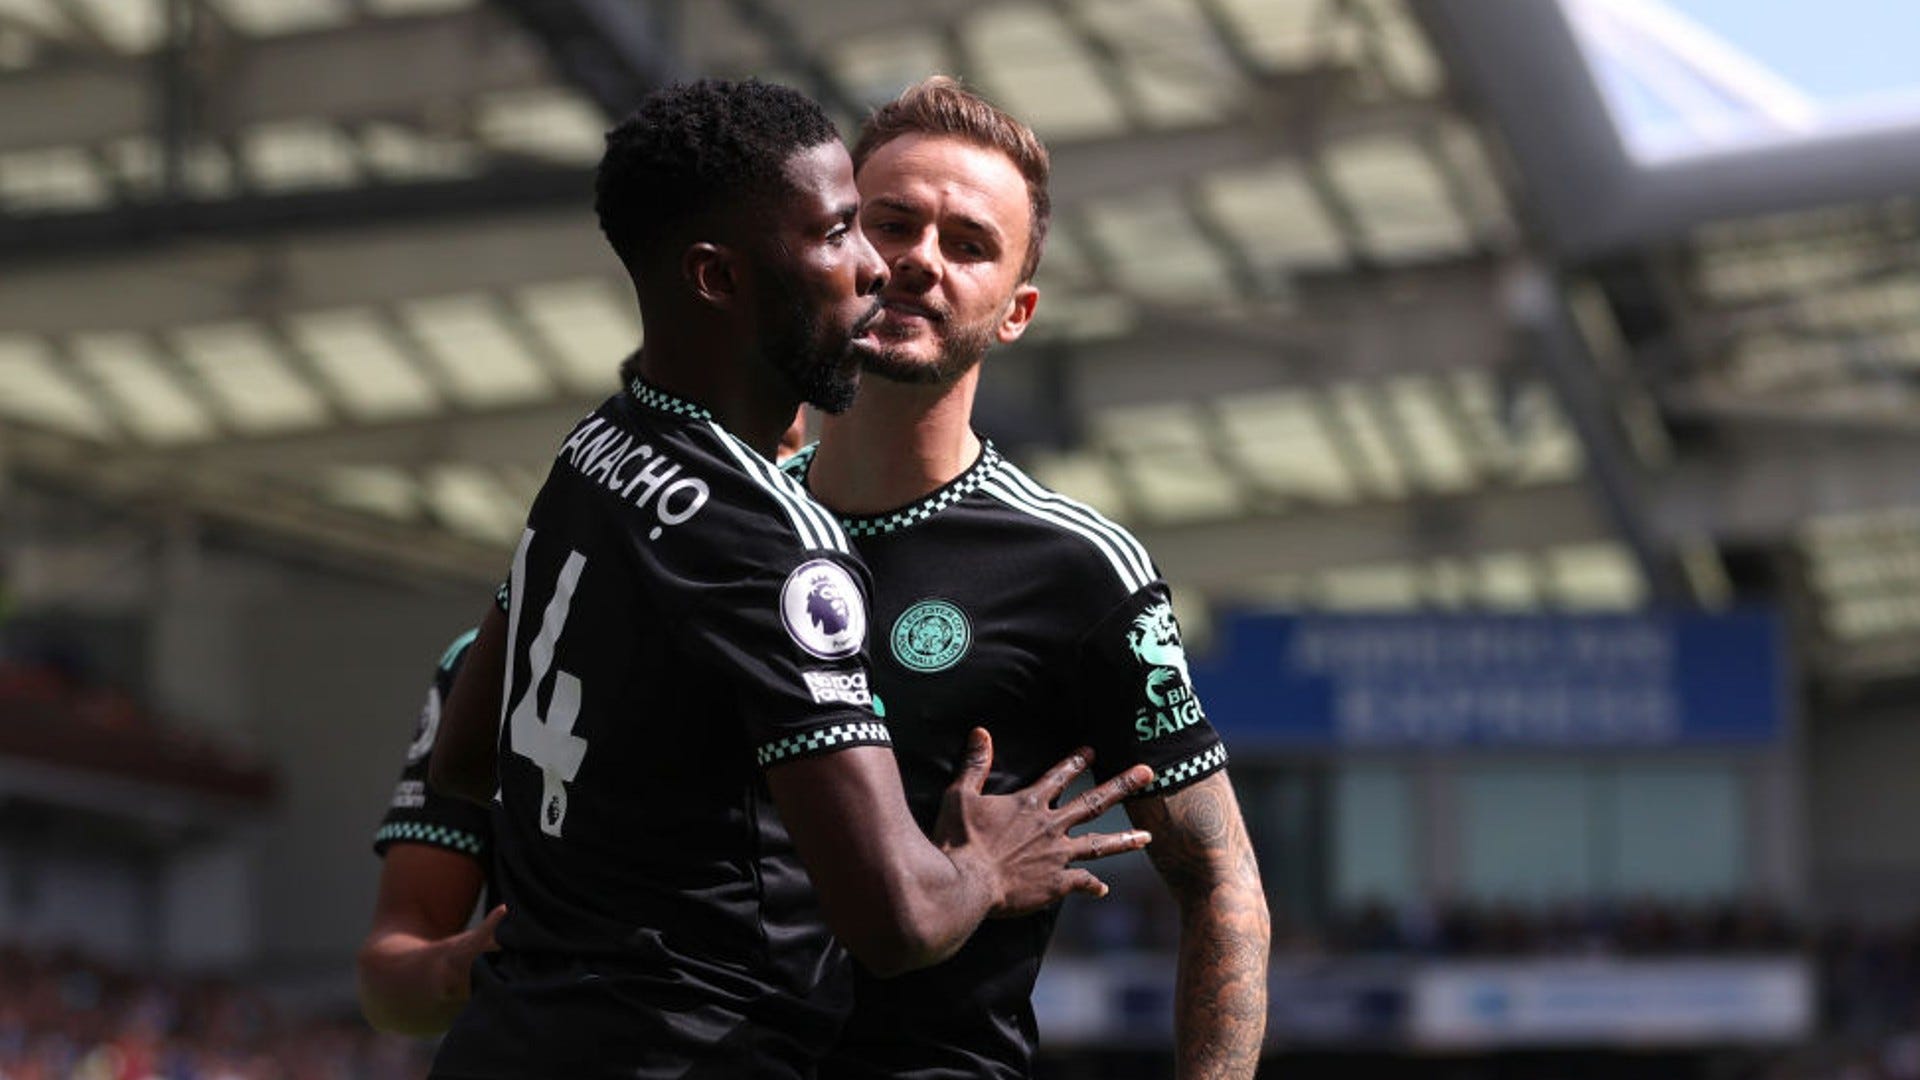 Iheanacho: Crime for Leicester City’s Rodgers not to start Super Eagle – Fans after defeat against Manchester City